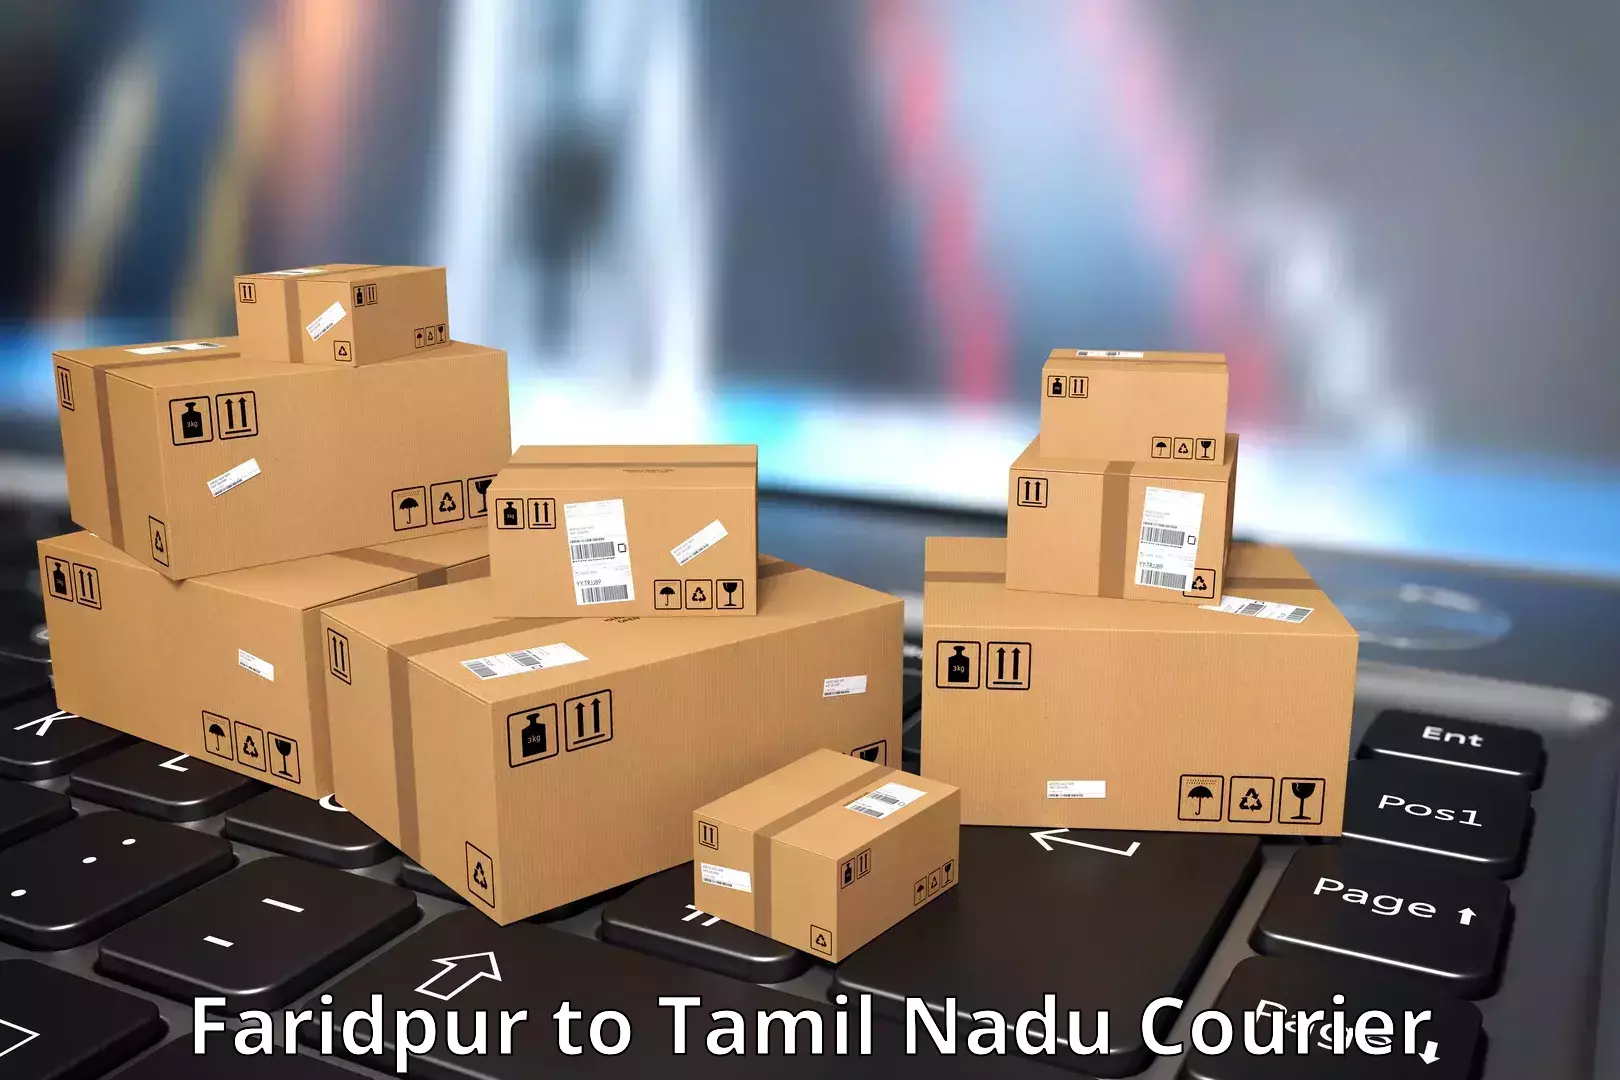 Express delivery network Faridpur to Madurai